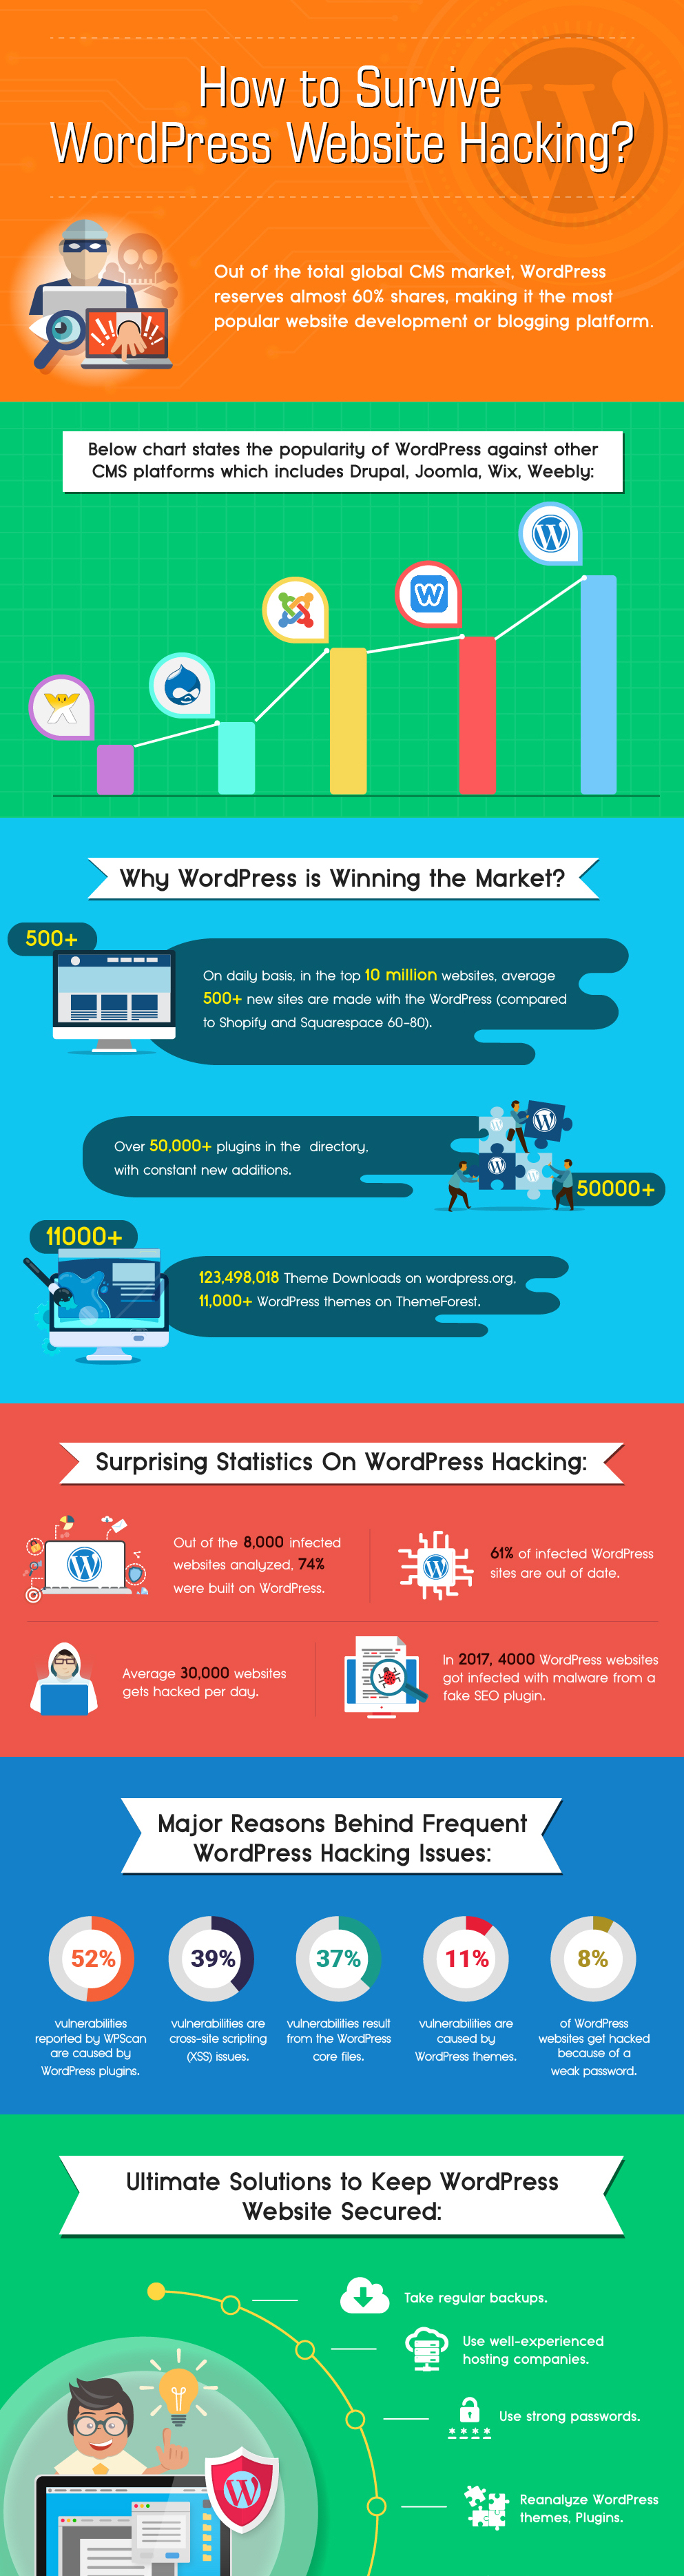 Wordpress is winning the market in terms of penetration. Yet, security is still an issue. Find solutions to keep your Wordpress website secure. All on this infographic.